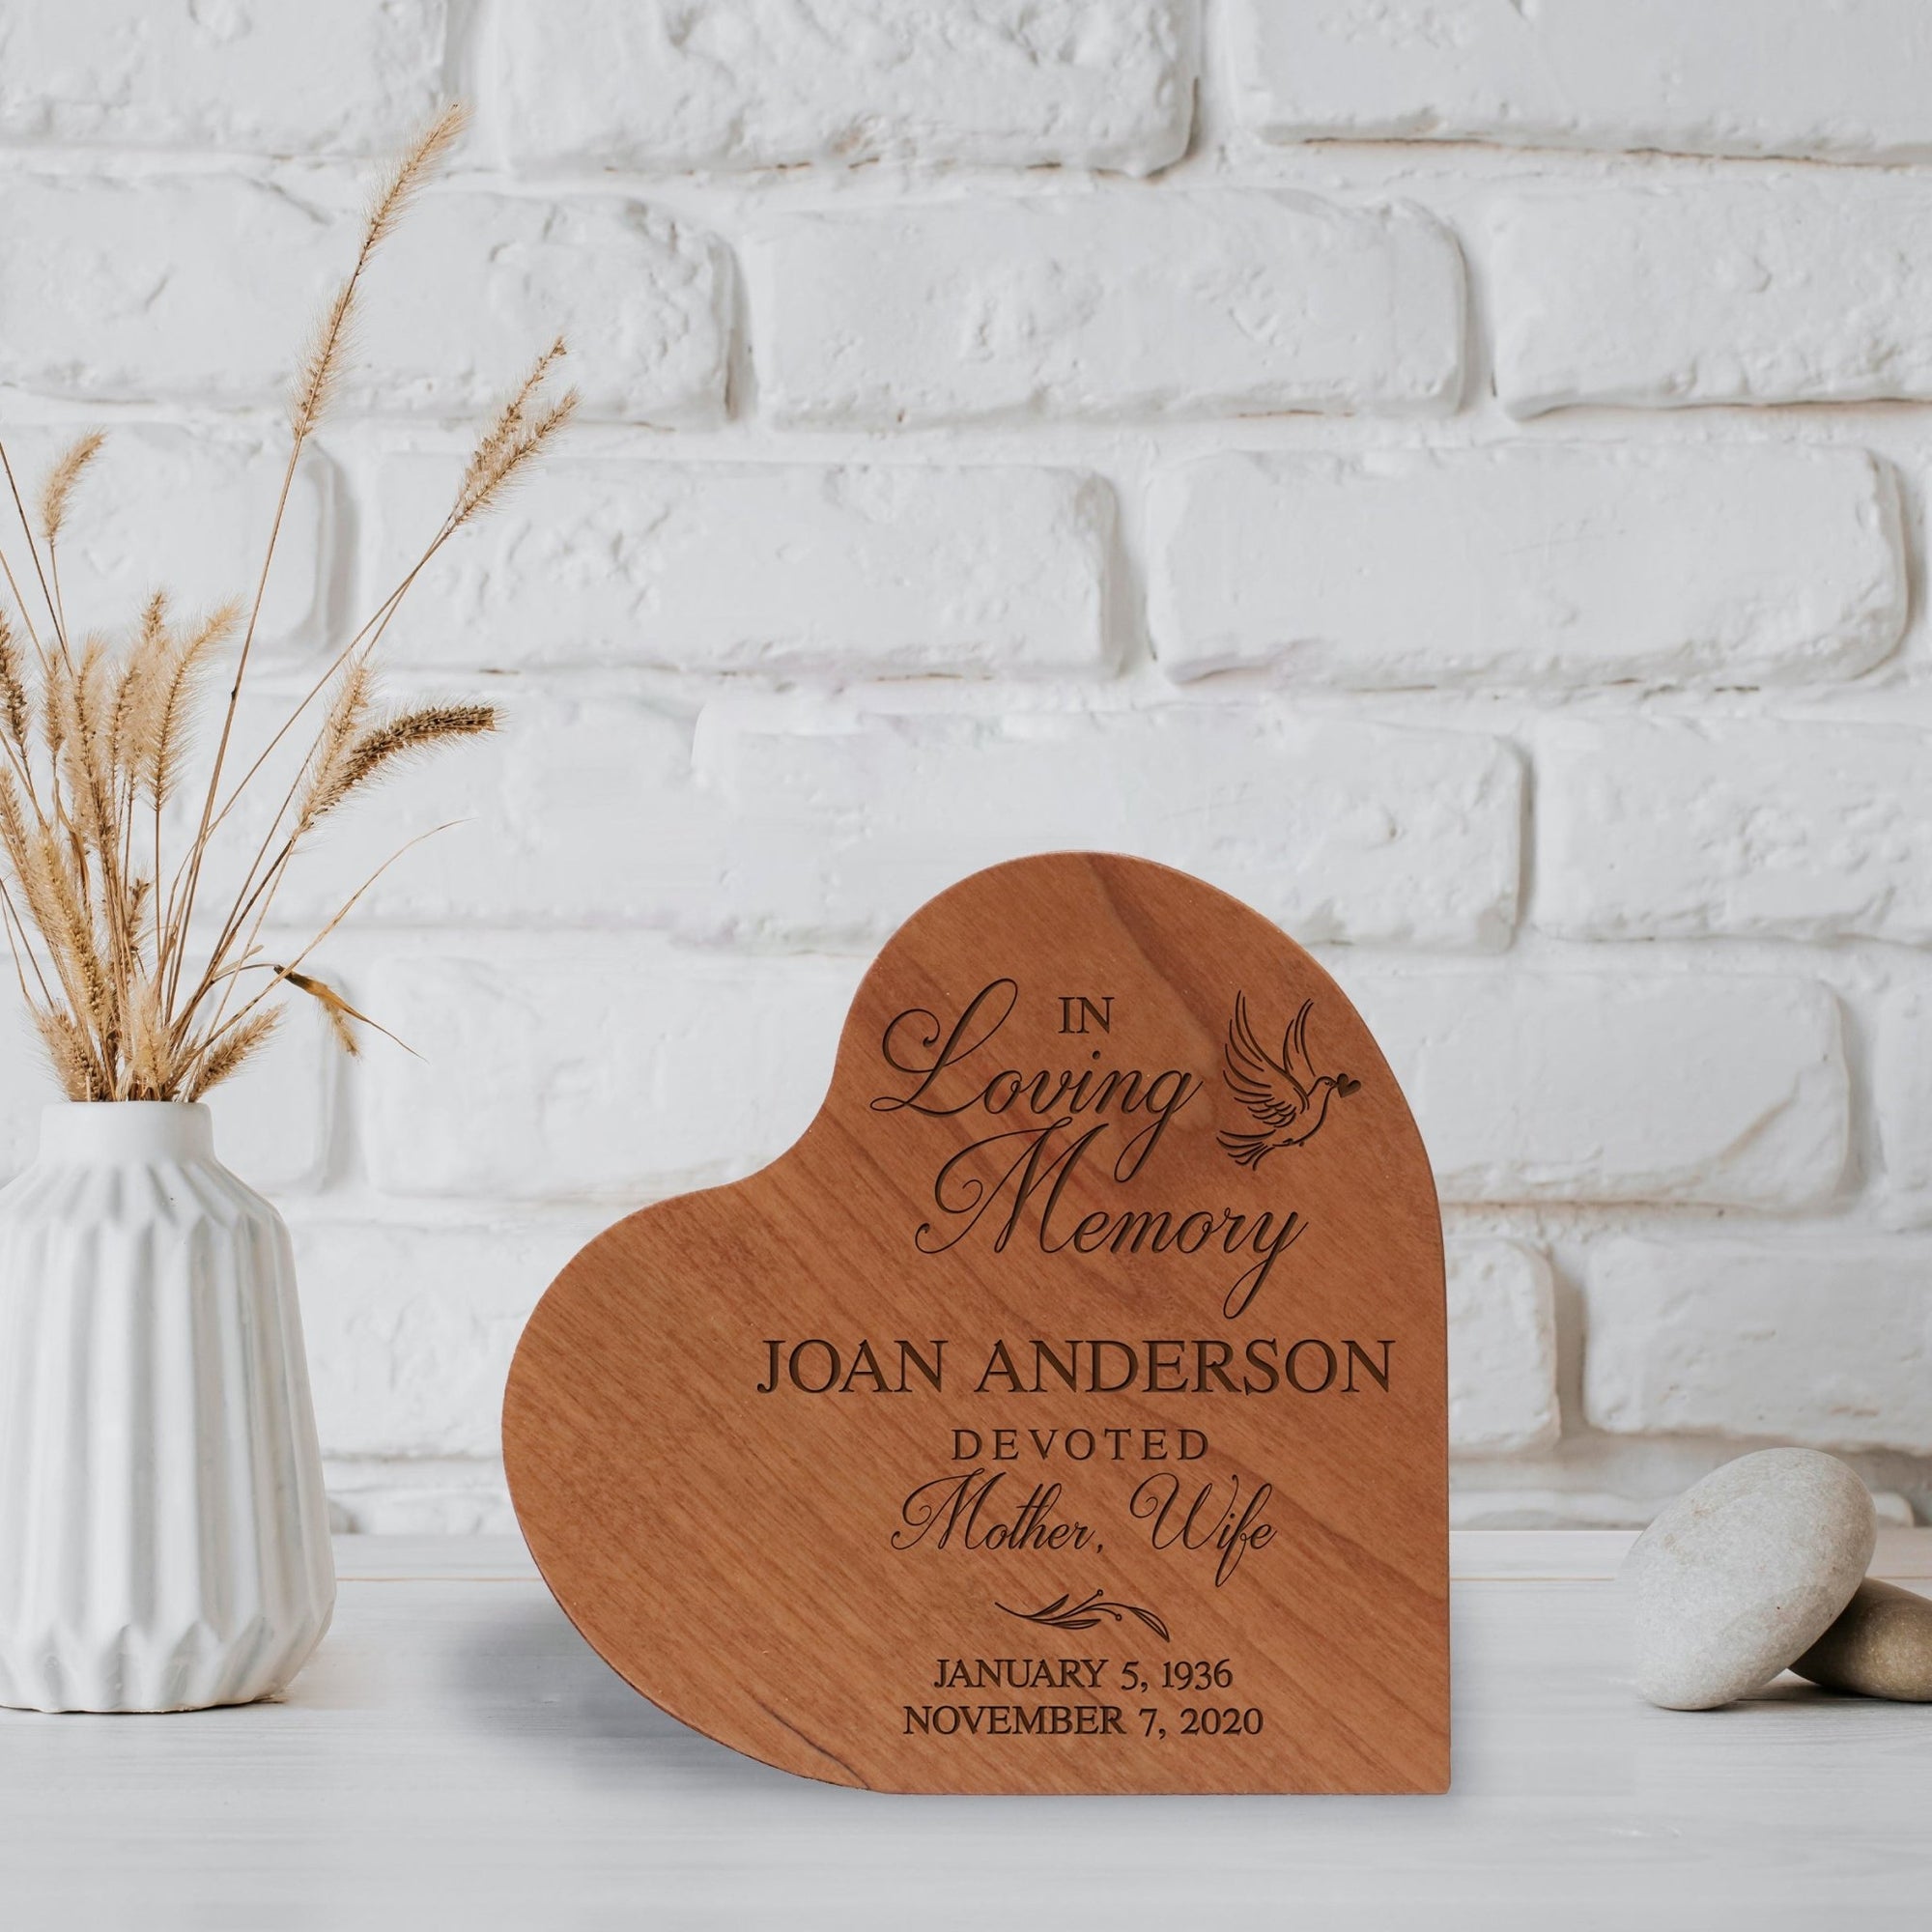 Personalized Small Heart Cremation Urn Keepsake For Human Ashes In Loving Memory - LifeSong Milestones